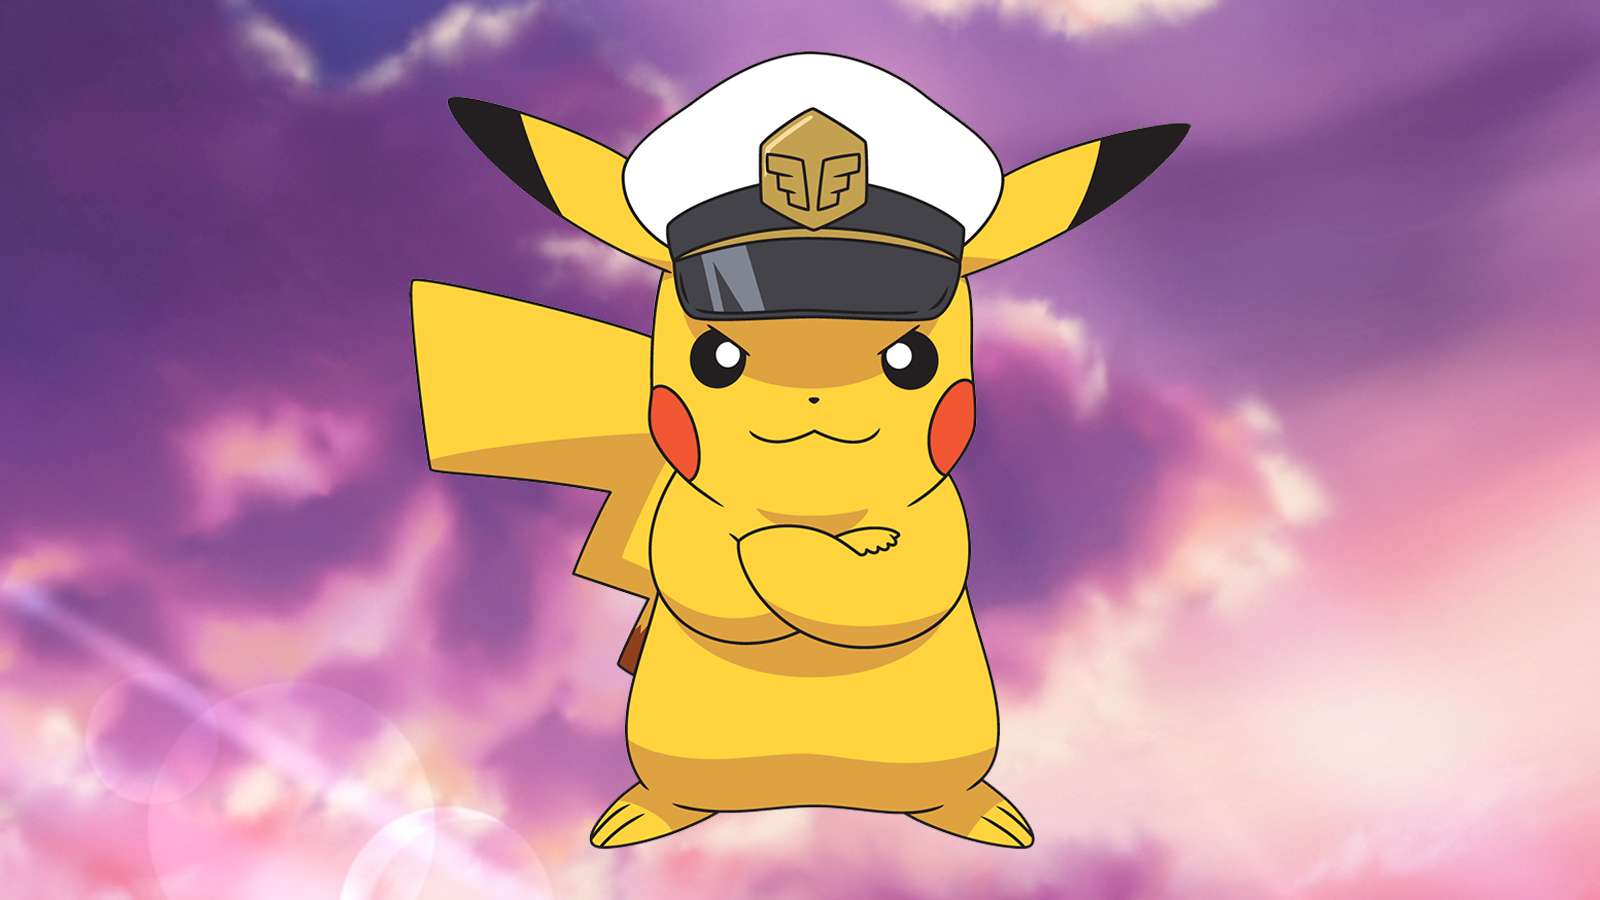 Captain Pikachu appearing in the new Pokemon anime series